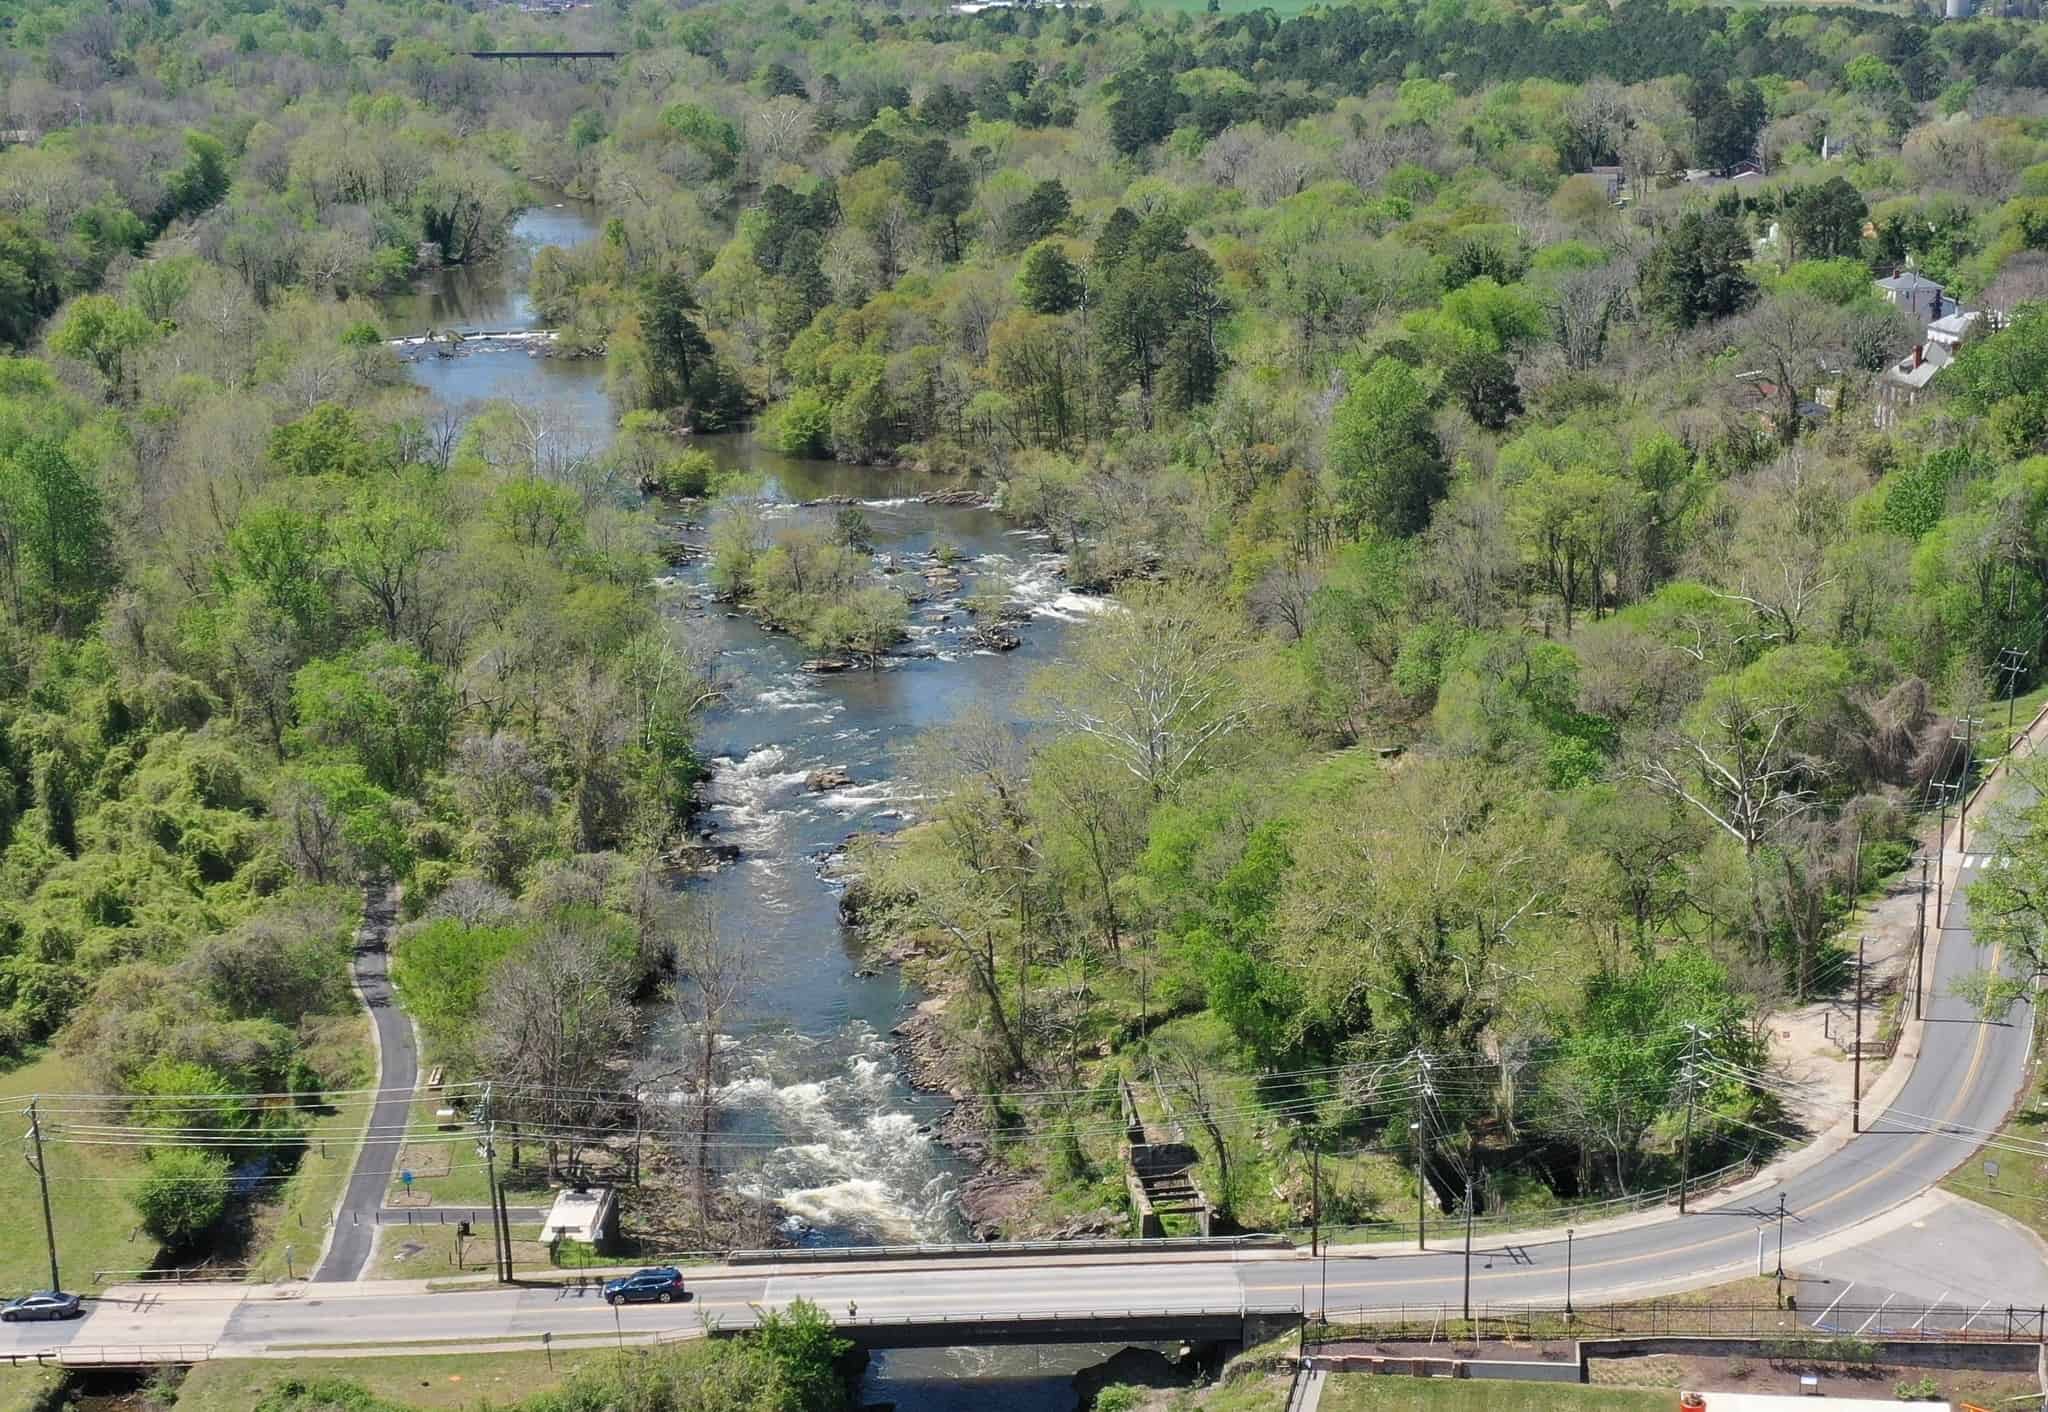 Drone shot of the falls of Appomattox River with car bridge in foreground and spring-green trees lining either side of the river.